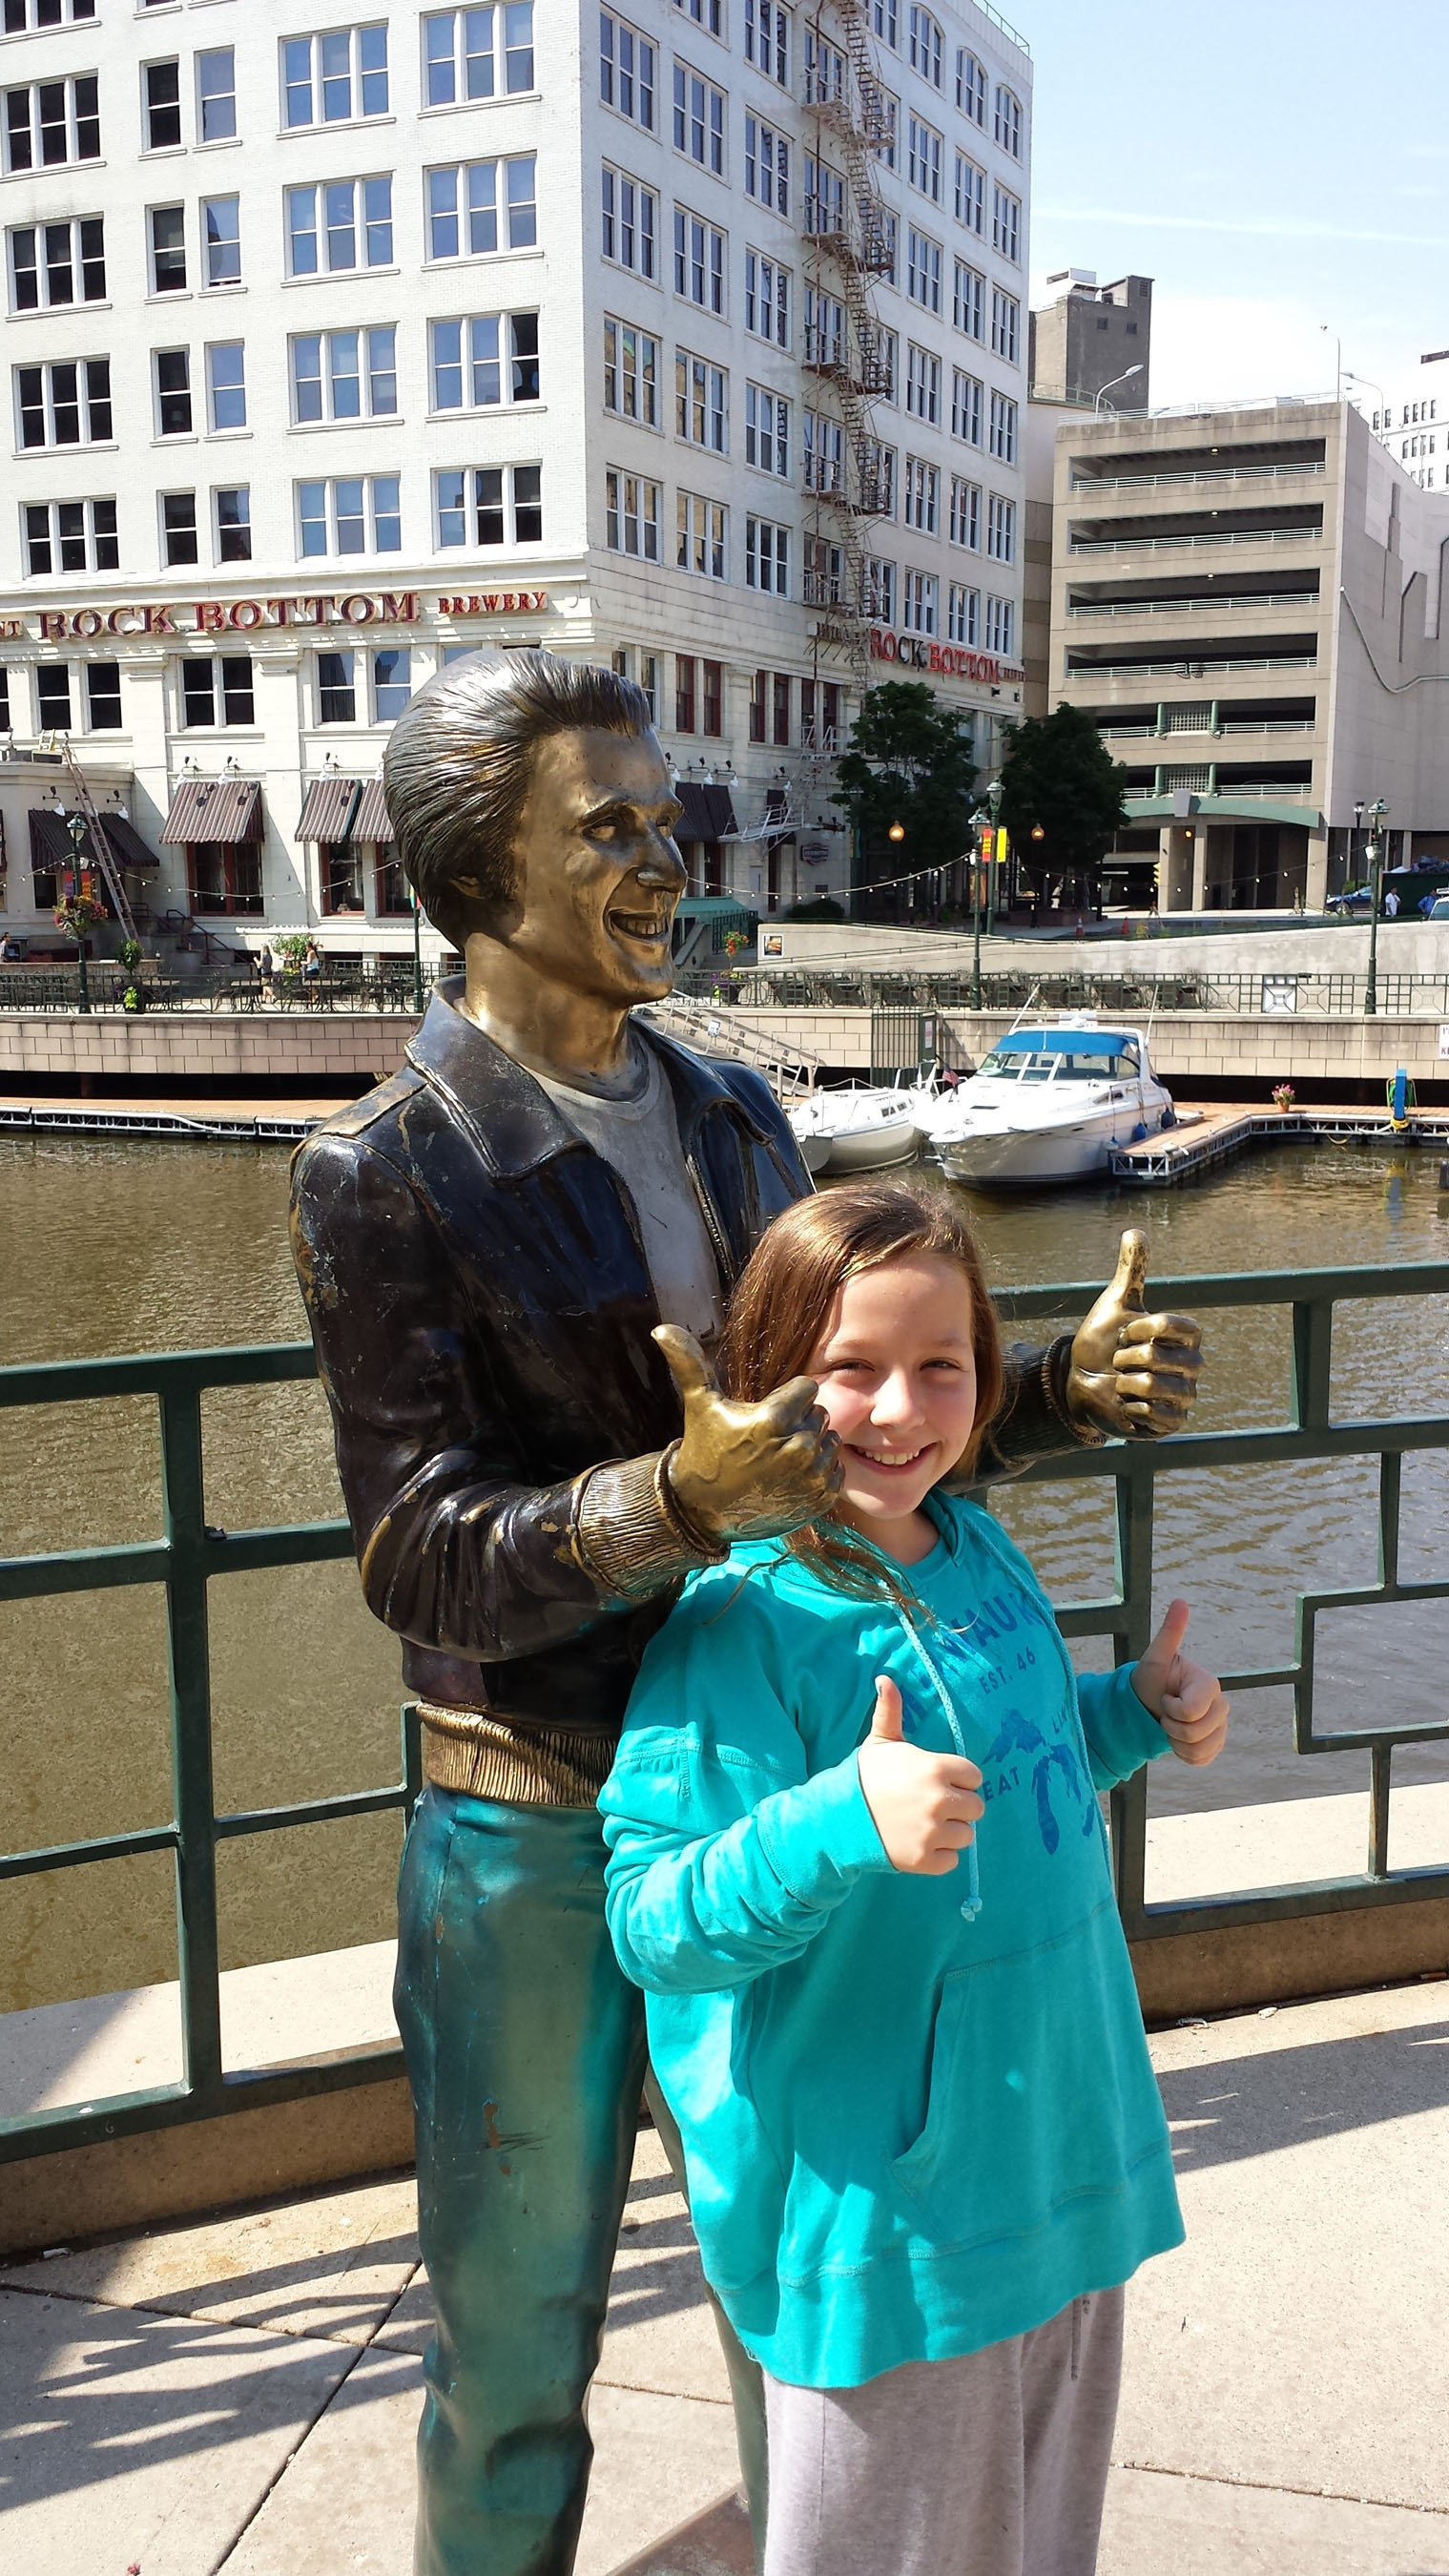 Thumbs Up for Milwaukee, Top Pick for US Family Travel for 2014!. (PRNewsFoto/ABC Travel Guides for Kids) (PRNewsFoto/ABC TRAVEL GUIDES FOR KIDS)